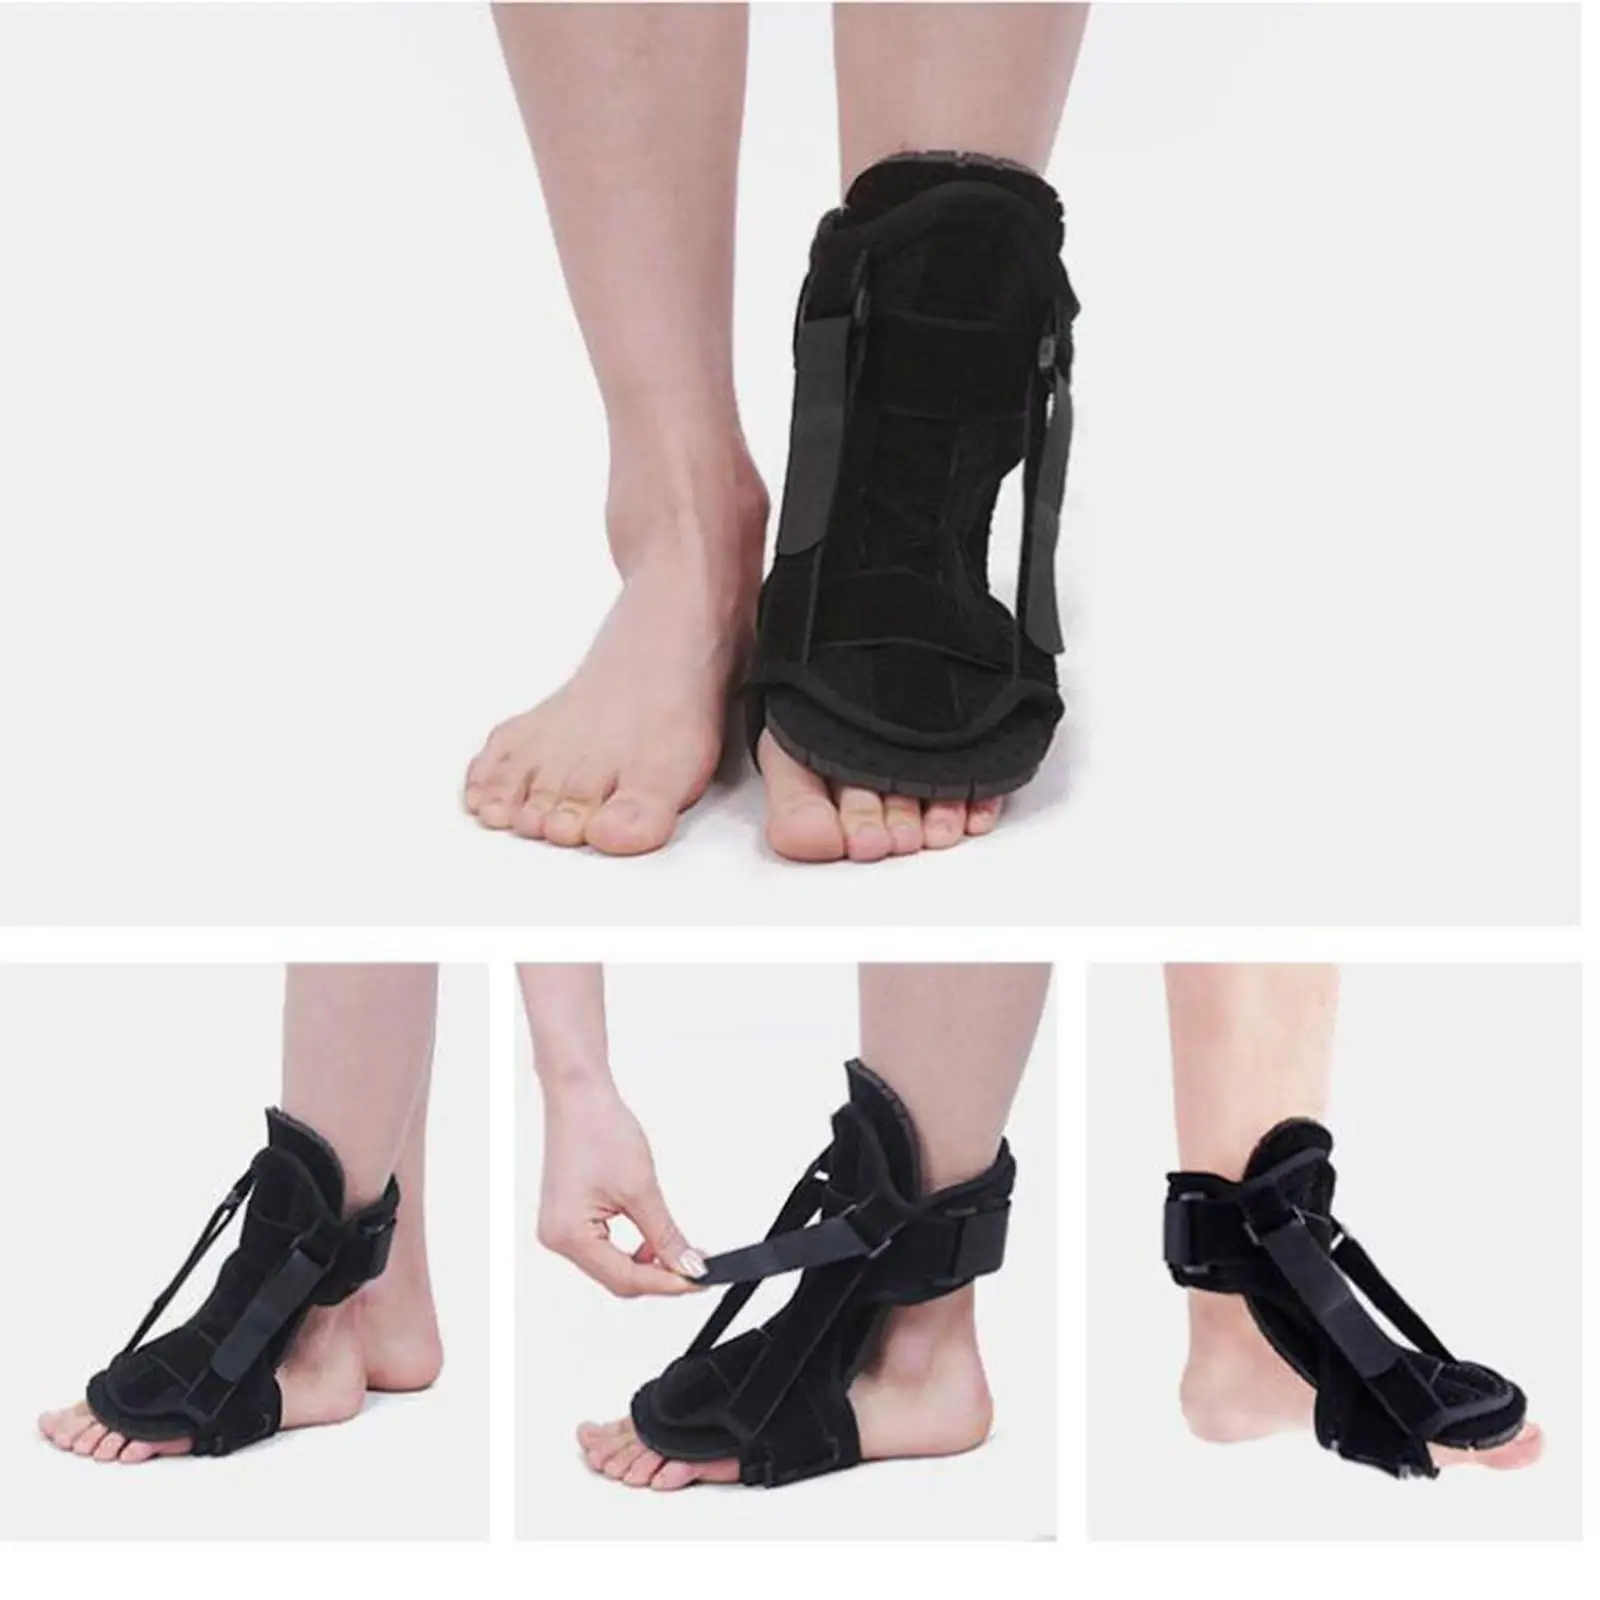   Built  Plate Relieve  Sleeping Immobilizer  Foot Drop Brace Double Fixing Straps